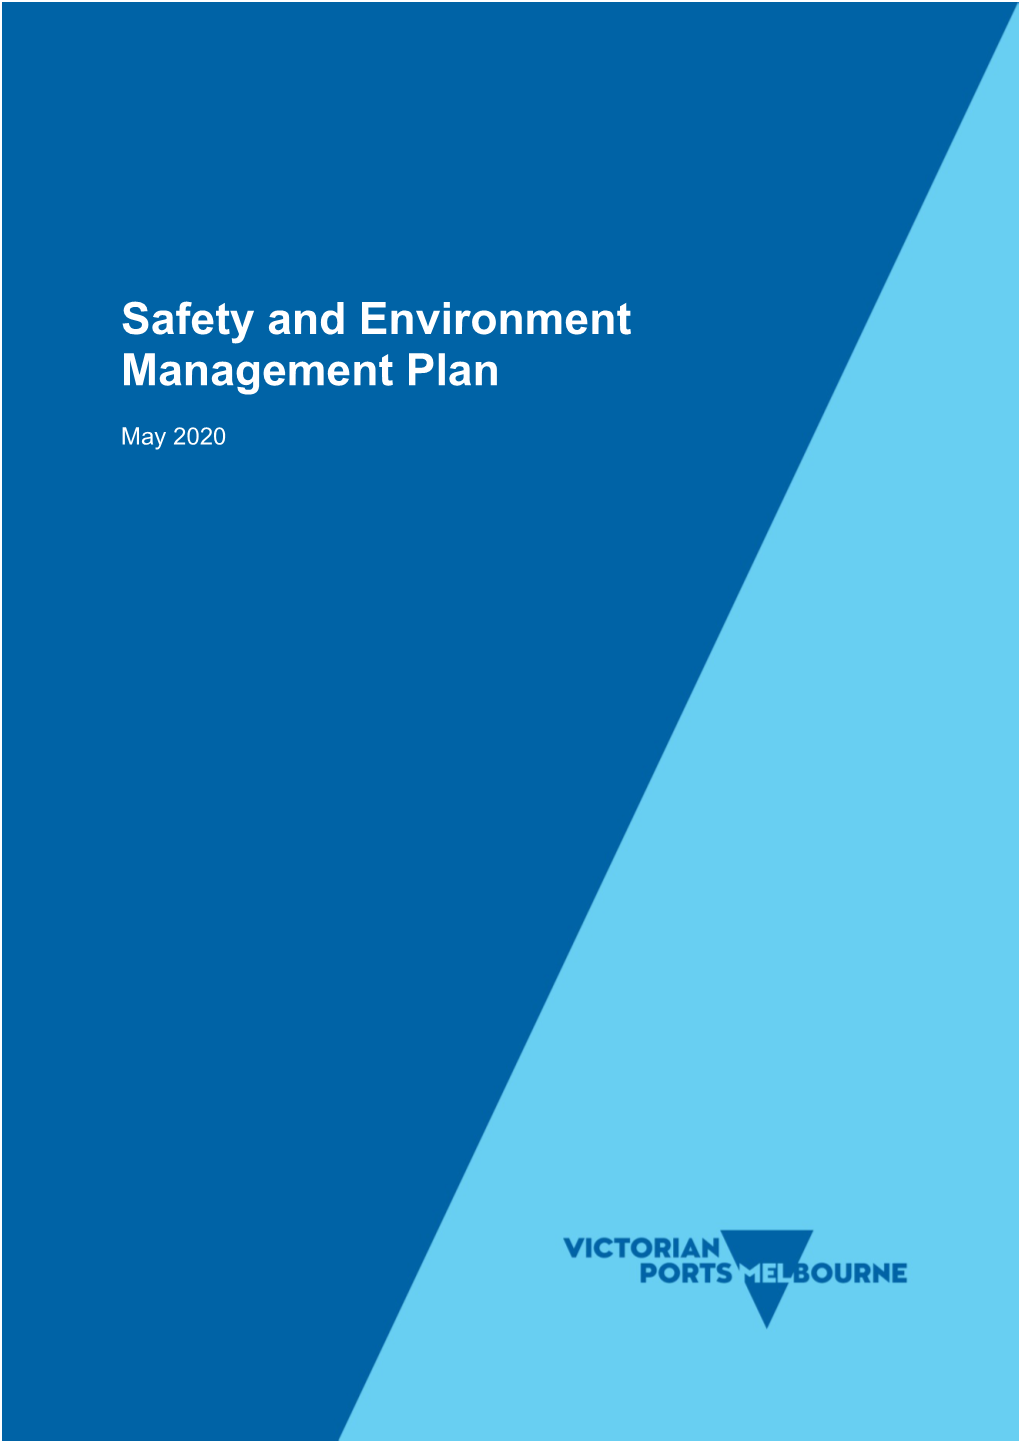 Safety and Environment Management Plan